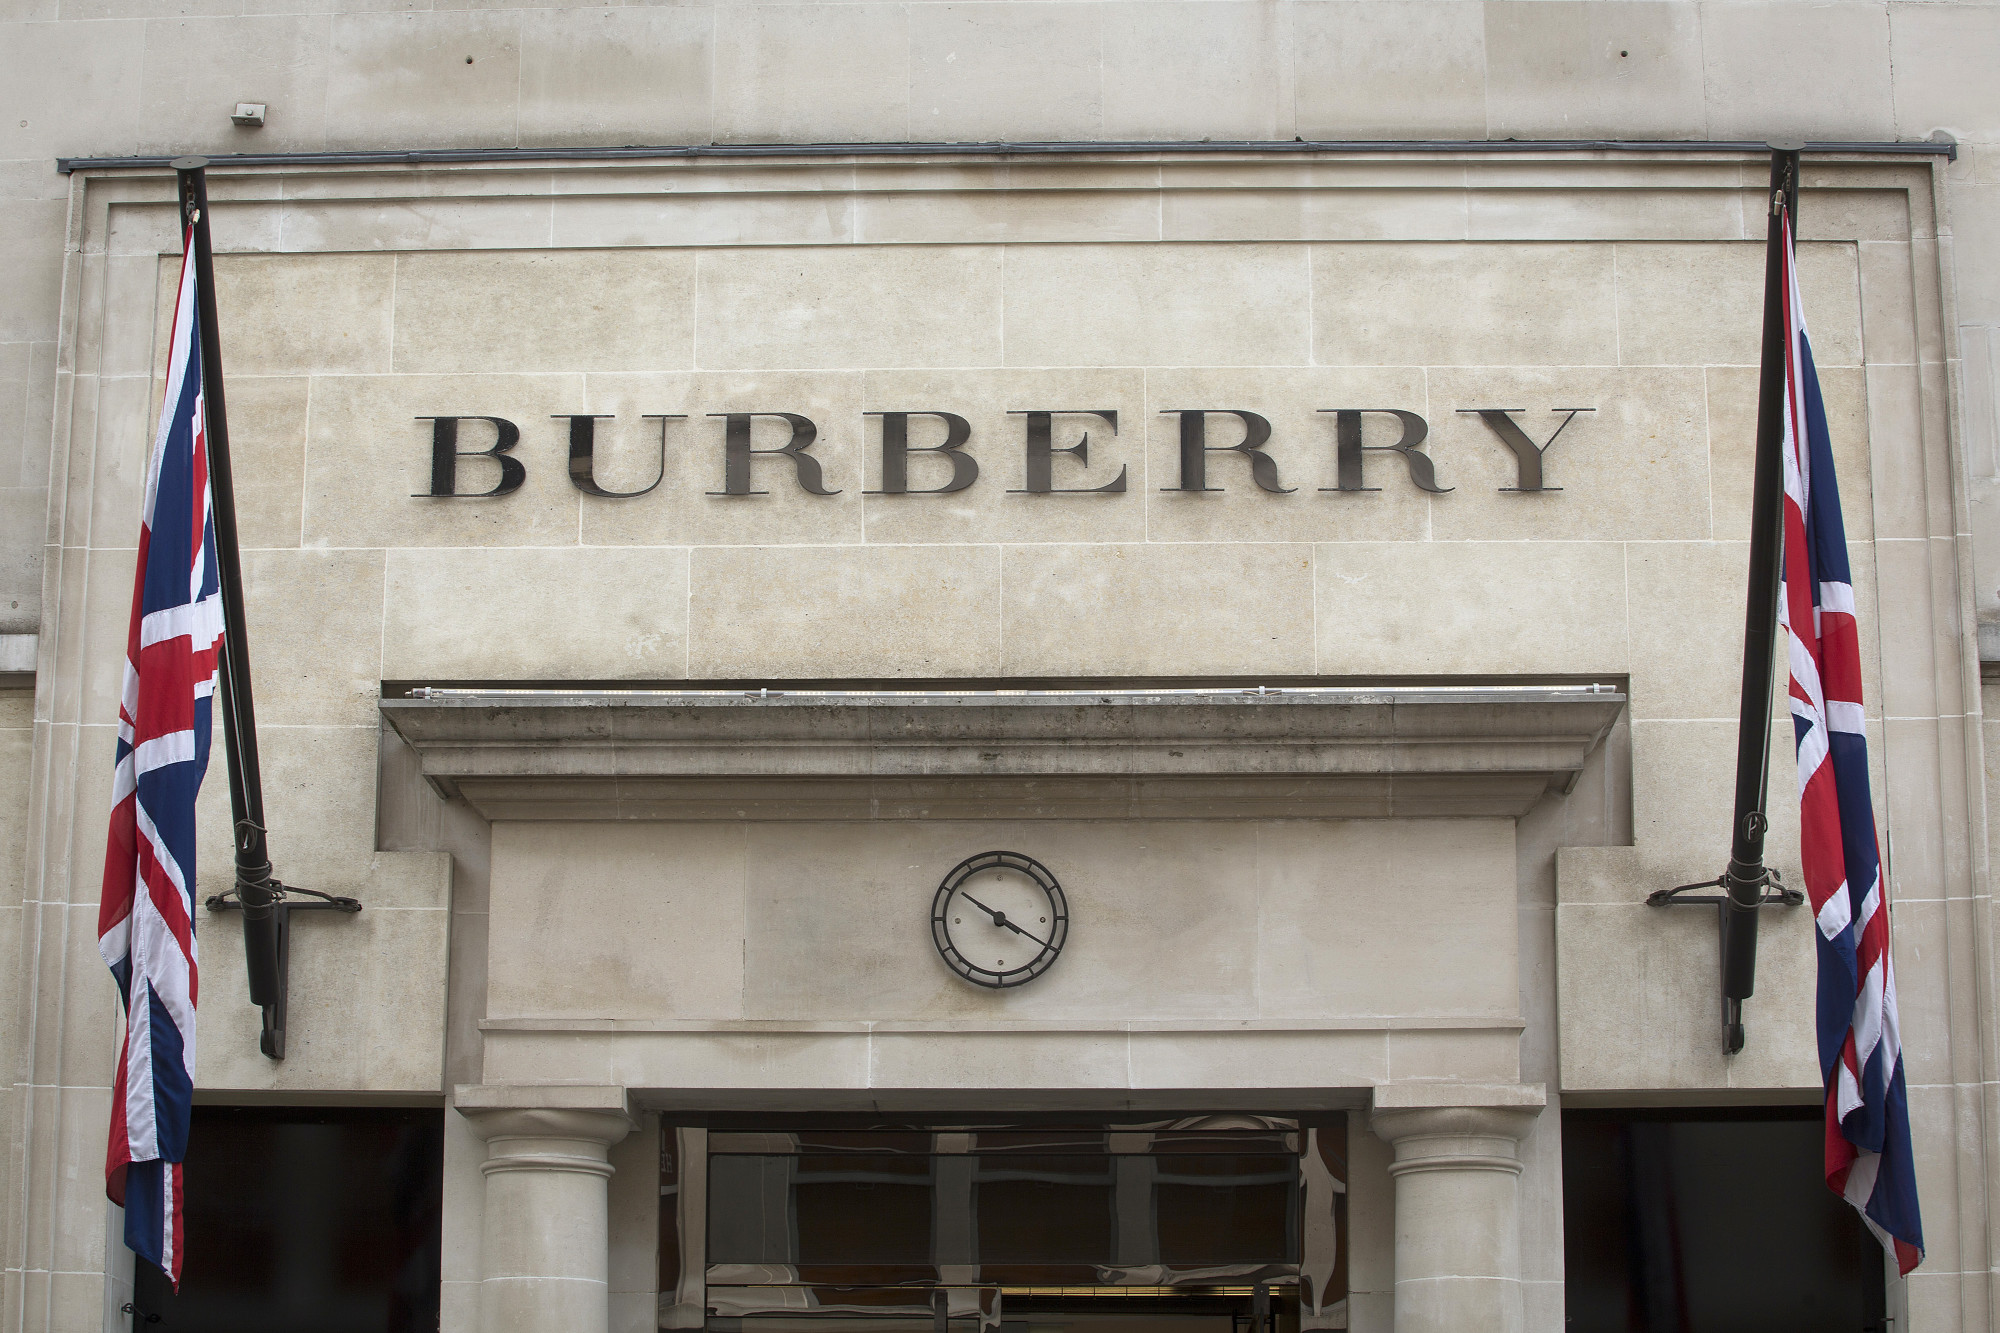 British luxury label Burberry has begun experimenting with live streaming its runway shows and uploads 'shoppable' videos to its website.